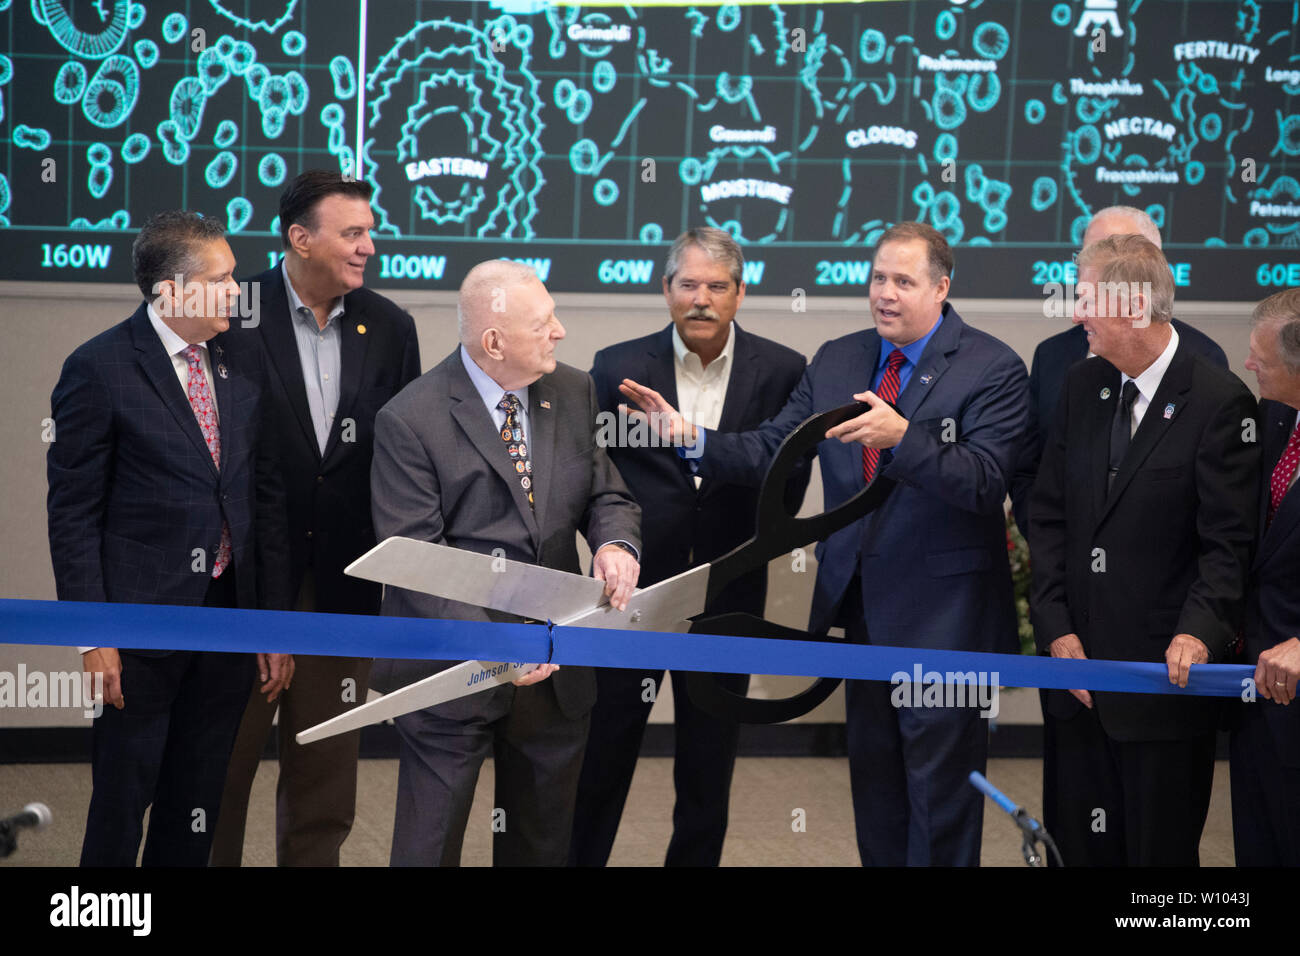 Dignitaries gather in the Mission Control Center at NASA's Johnson Space Center near Houston to dedicate the control center's restoration, which coincides with the 50th anniversary of Apollo 11's historic 1969 moon landing. Stock Photo